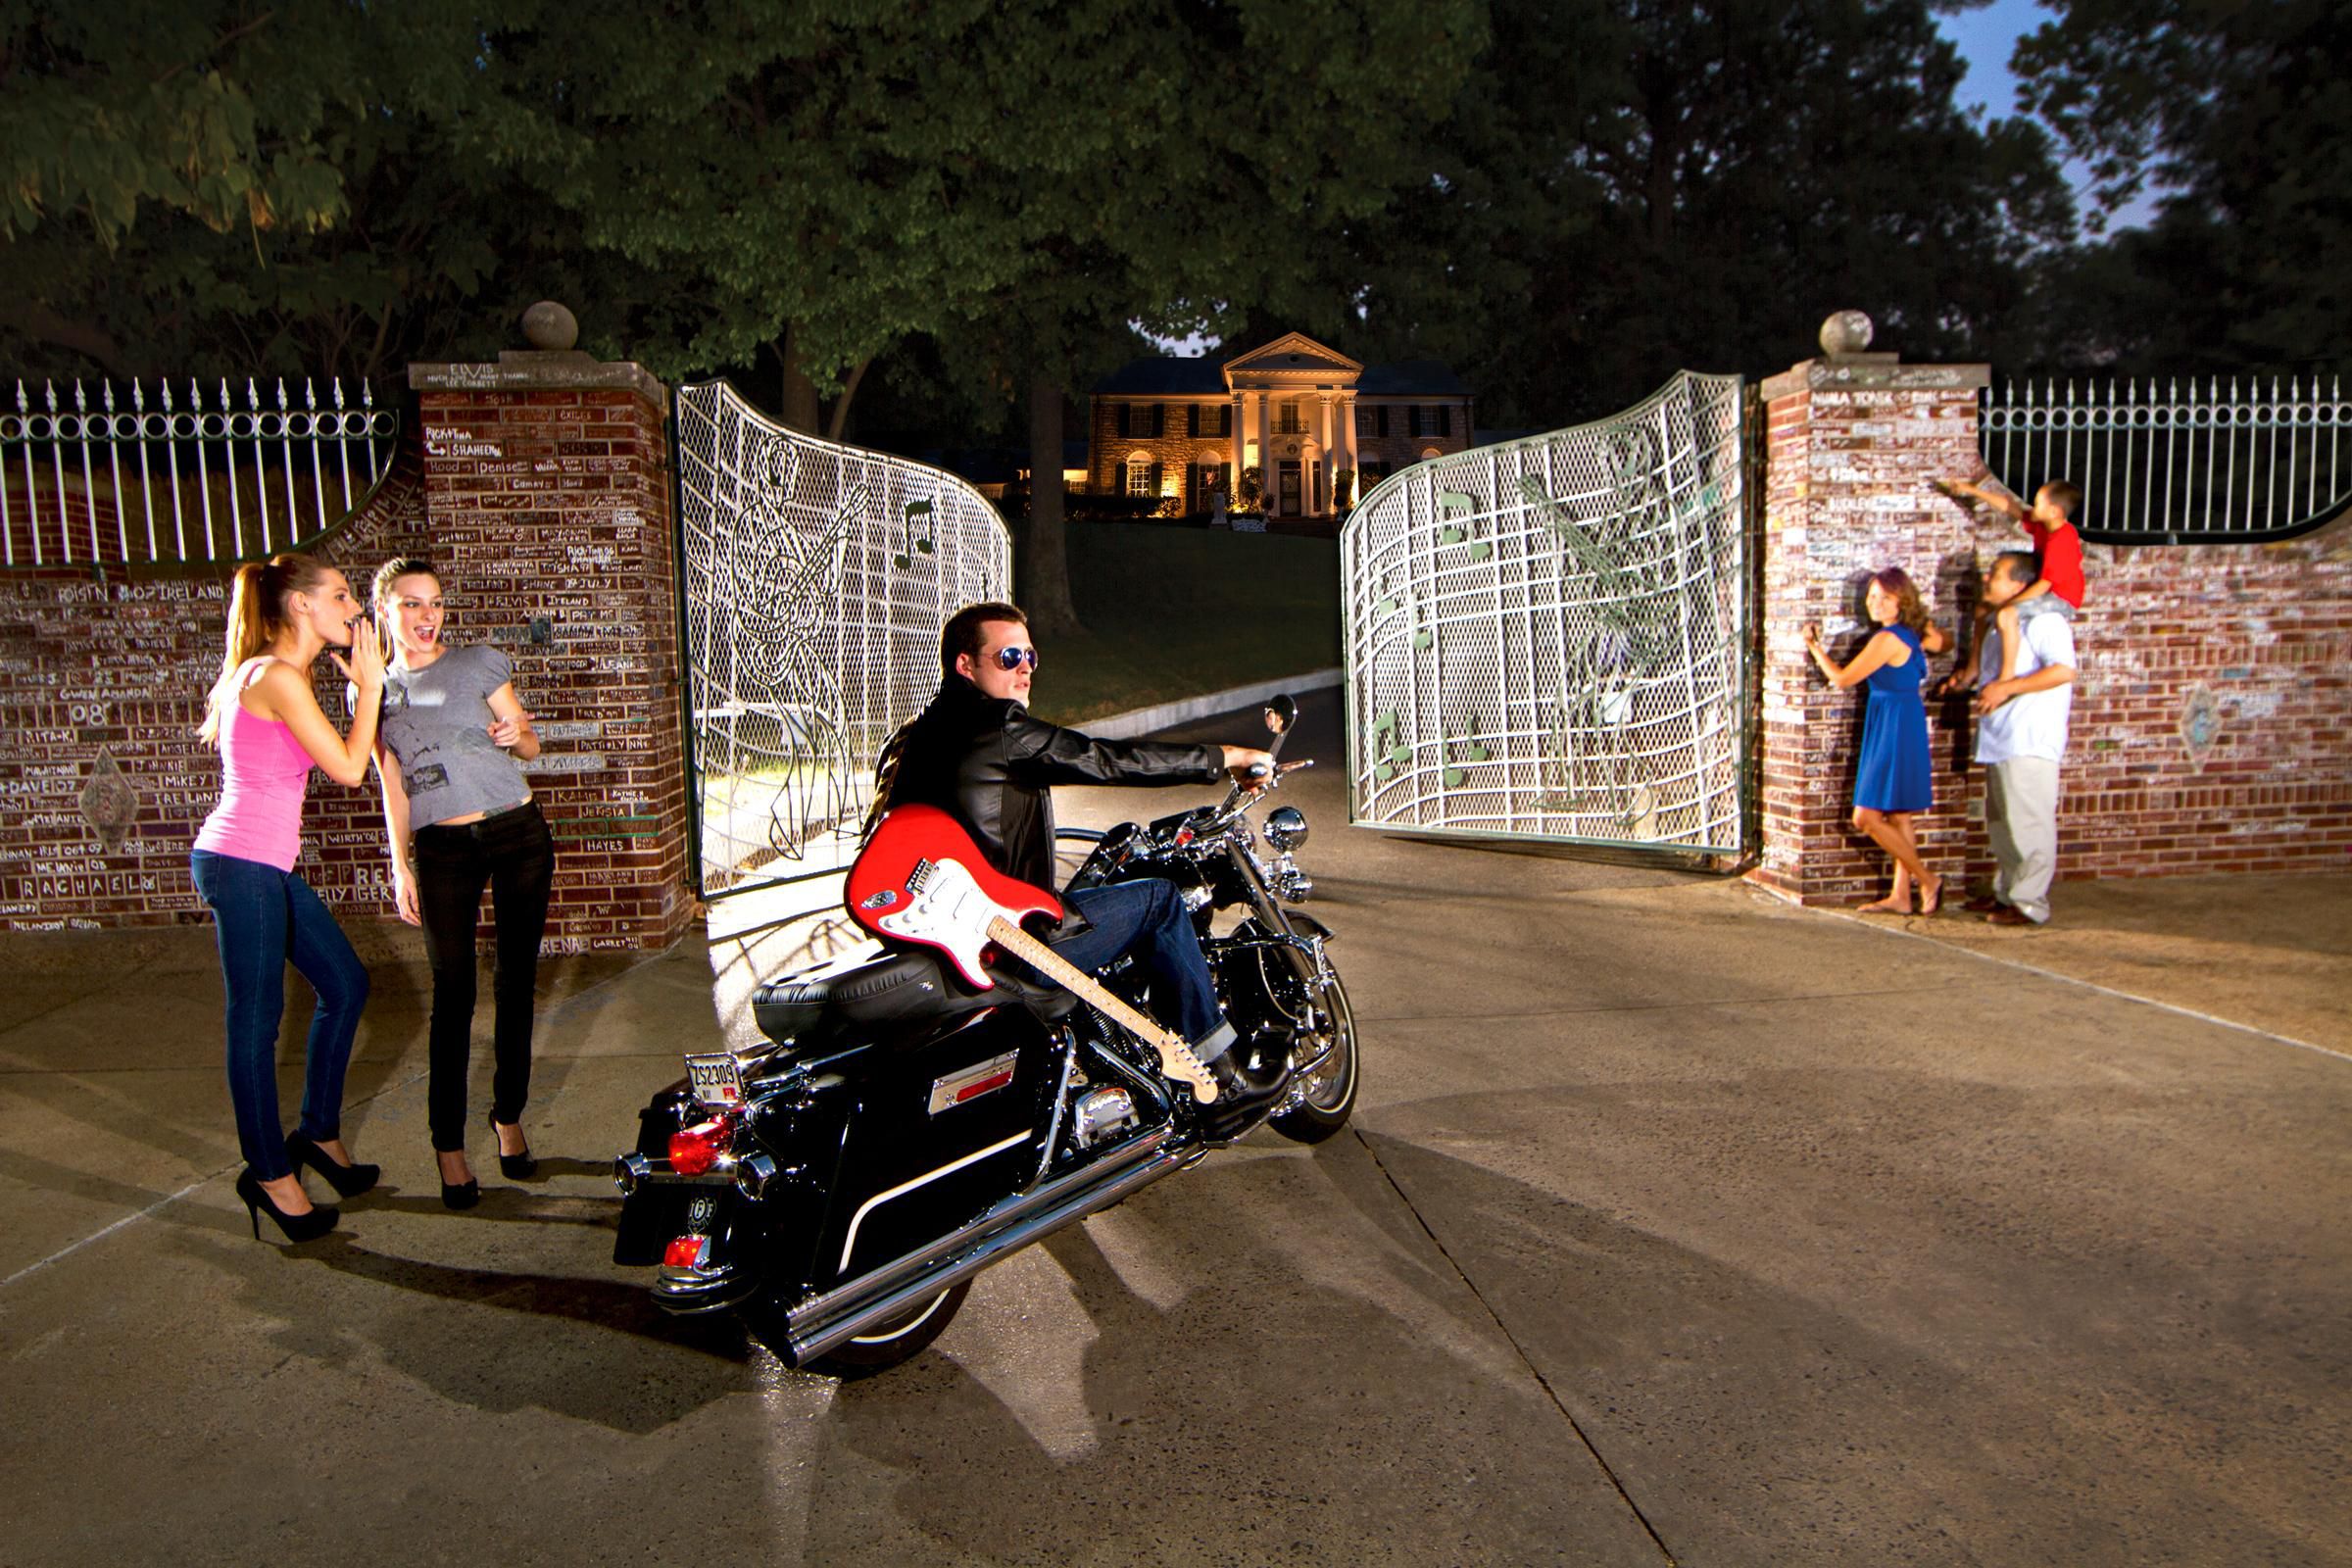 Book our Get me to Graceland package to see the Gates of Graceland